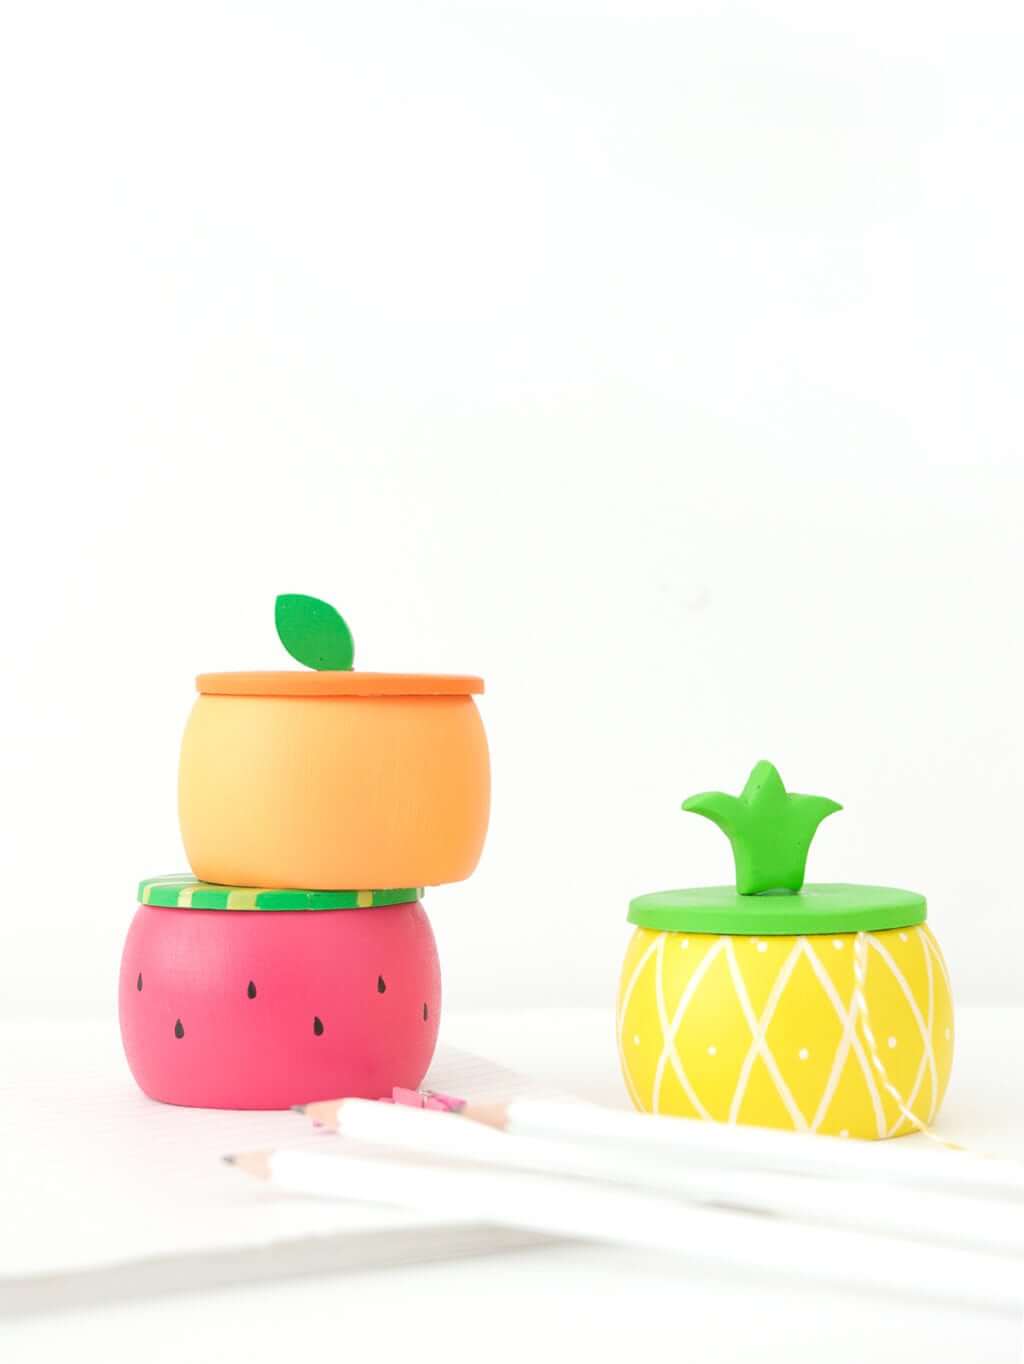 Easy-Peasy Fruit Trinket Boxes Project Using Polymer Clay